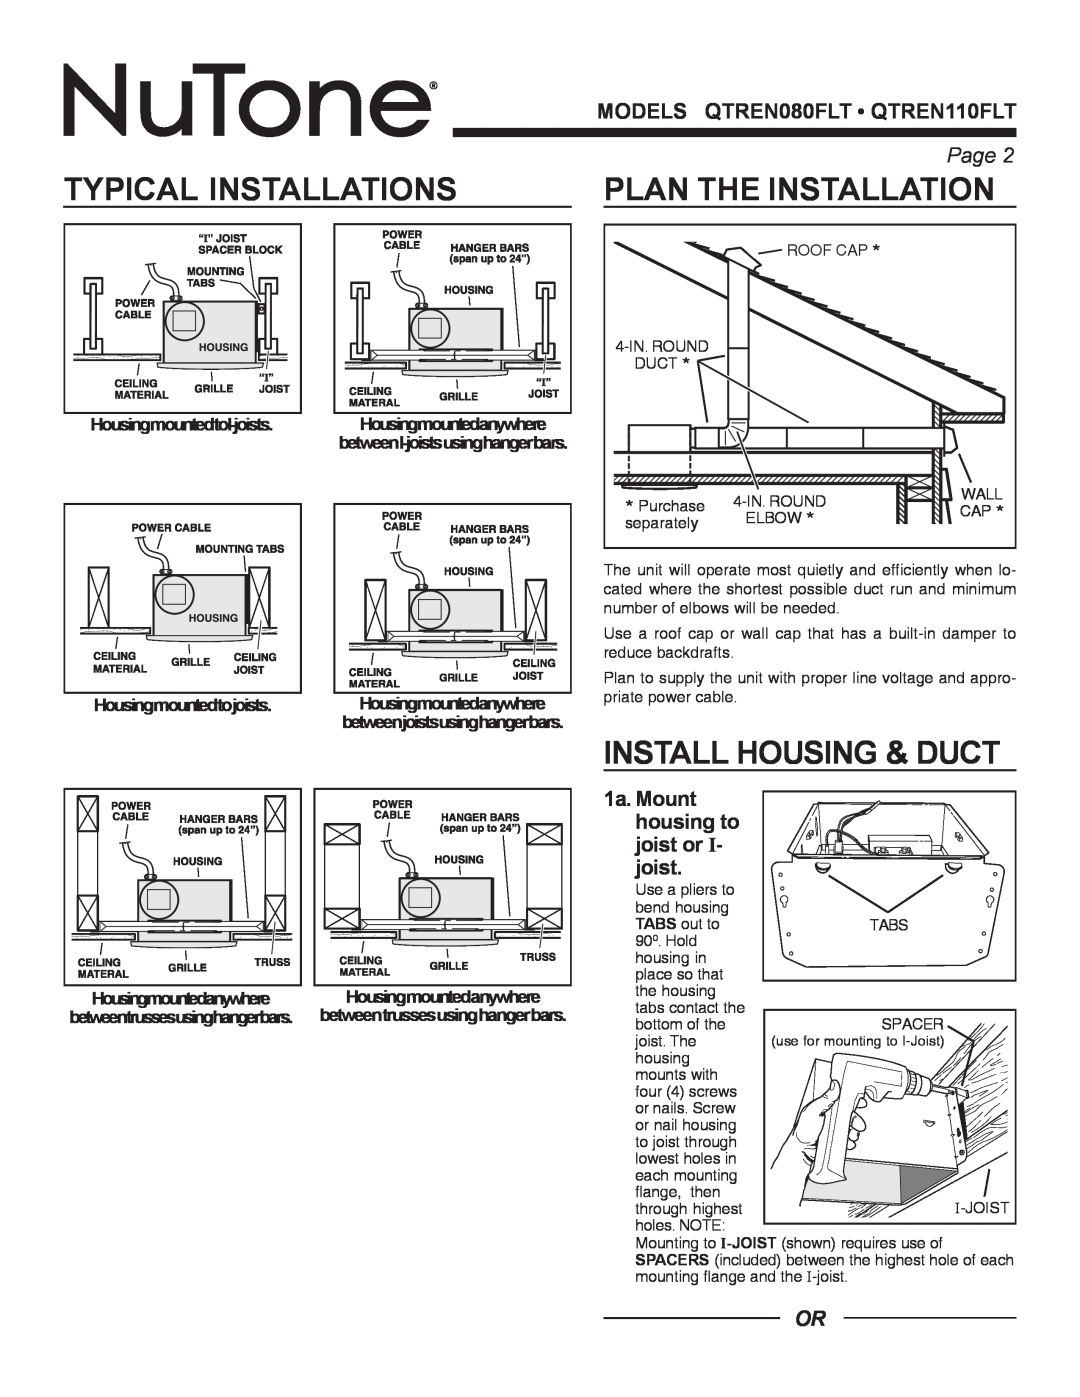 NuTone QTREN110FLT Typical Installations, Plan The Installation, Install Housing & Duct, Page, 1a. Mount, housing to 